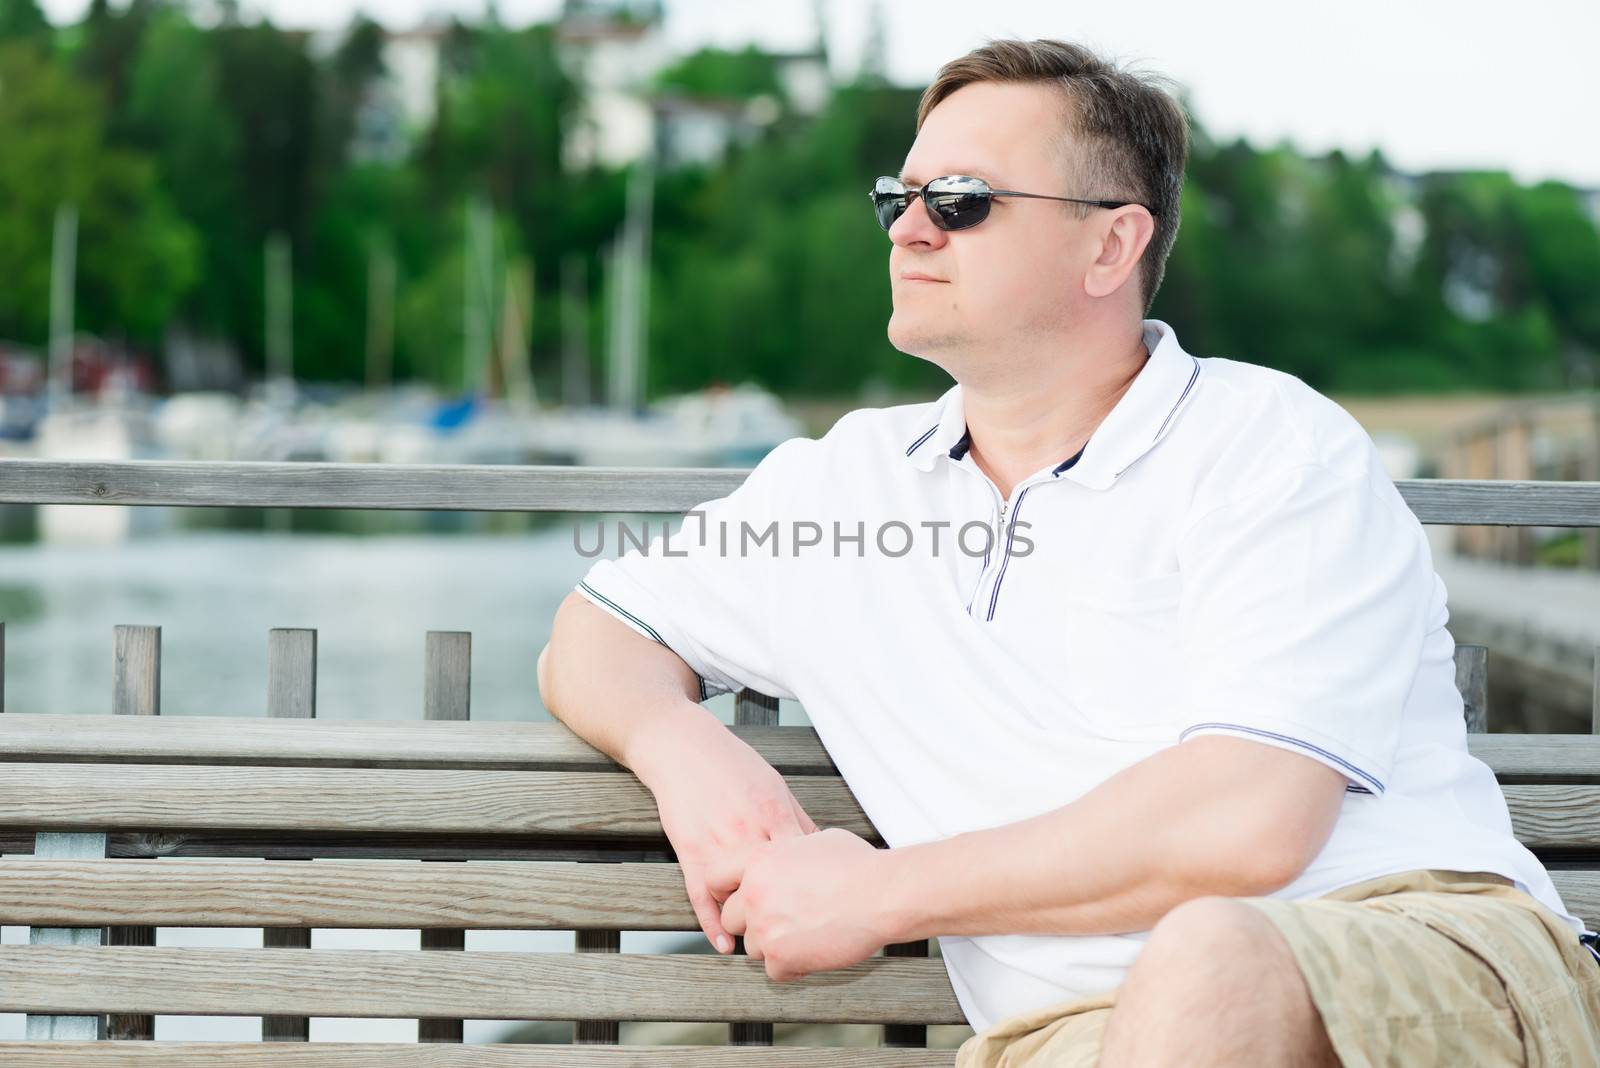 Middle aged men in sunglasses sitting on bench, looking away